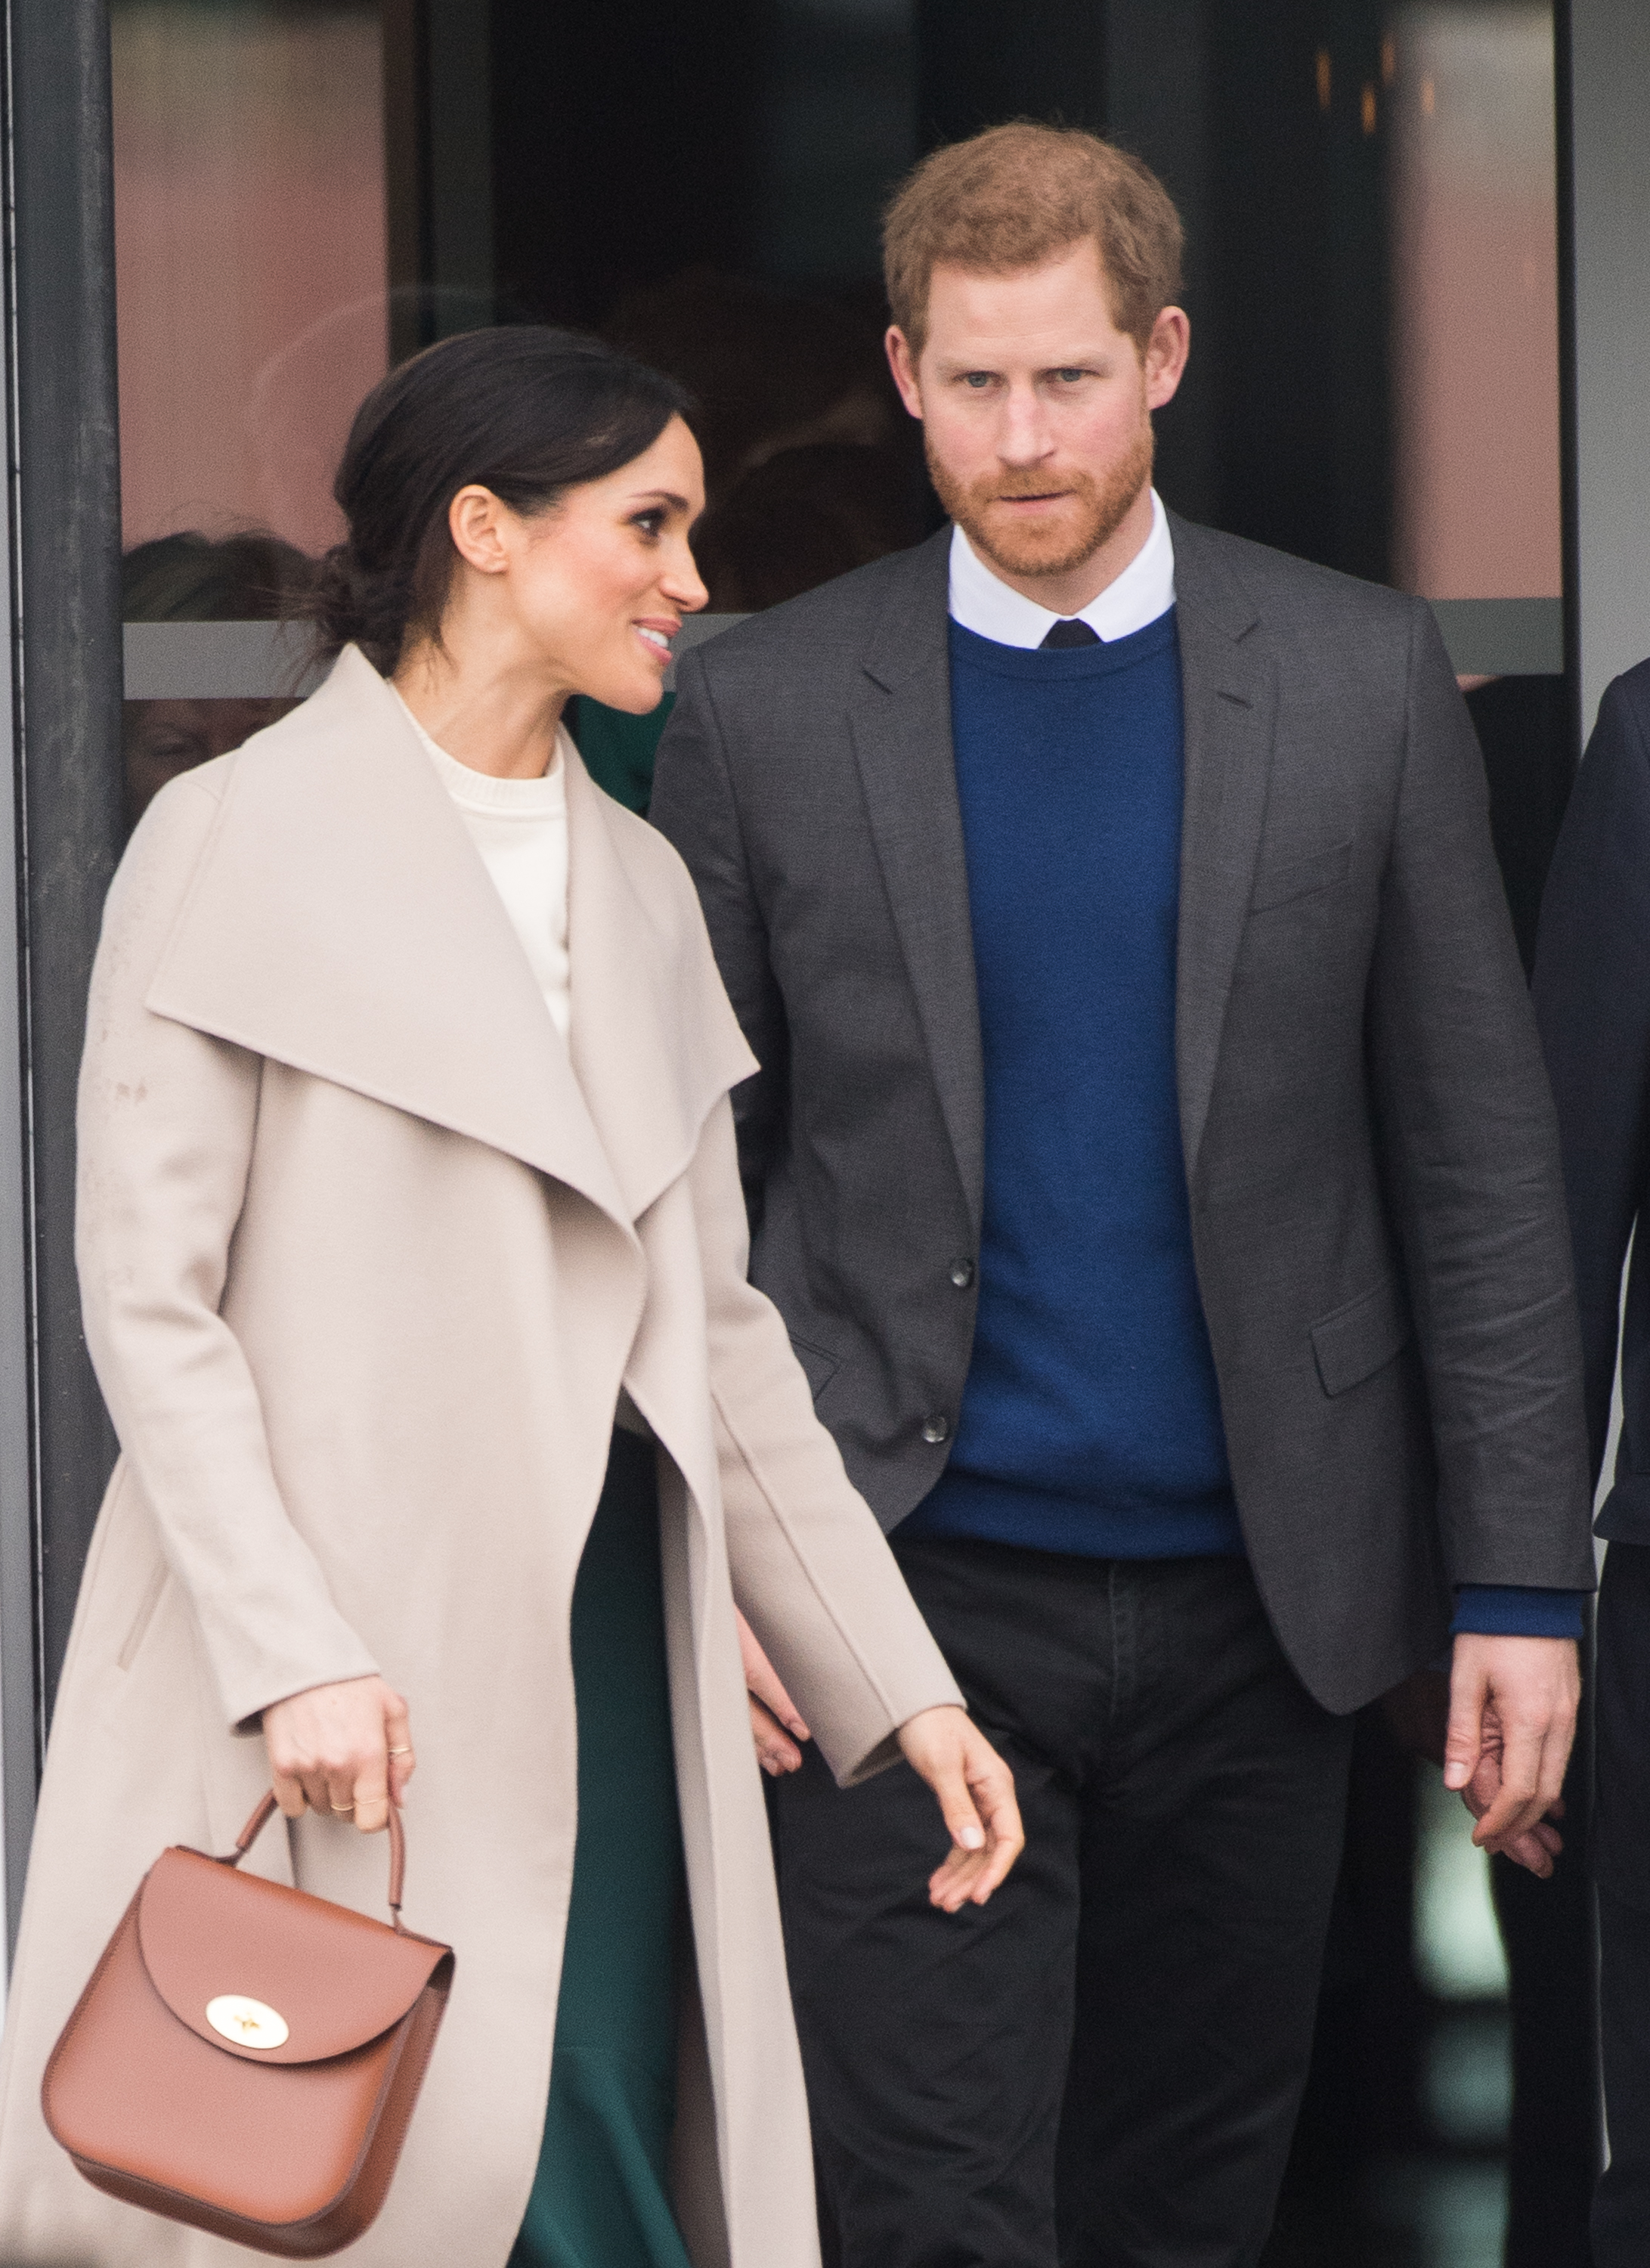 Meghan Markle and Prince Harry during a visit to Northern Ireland in 2018 | Source: Getty Images